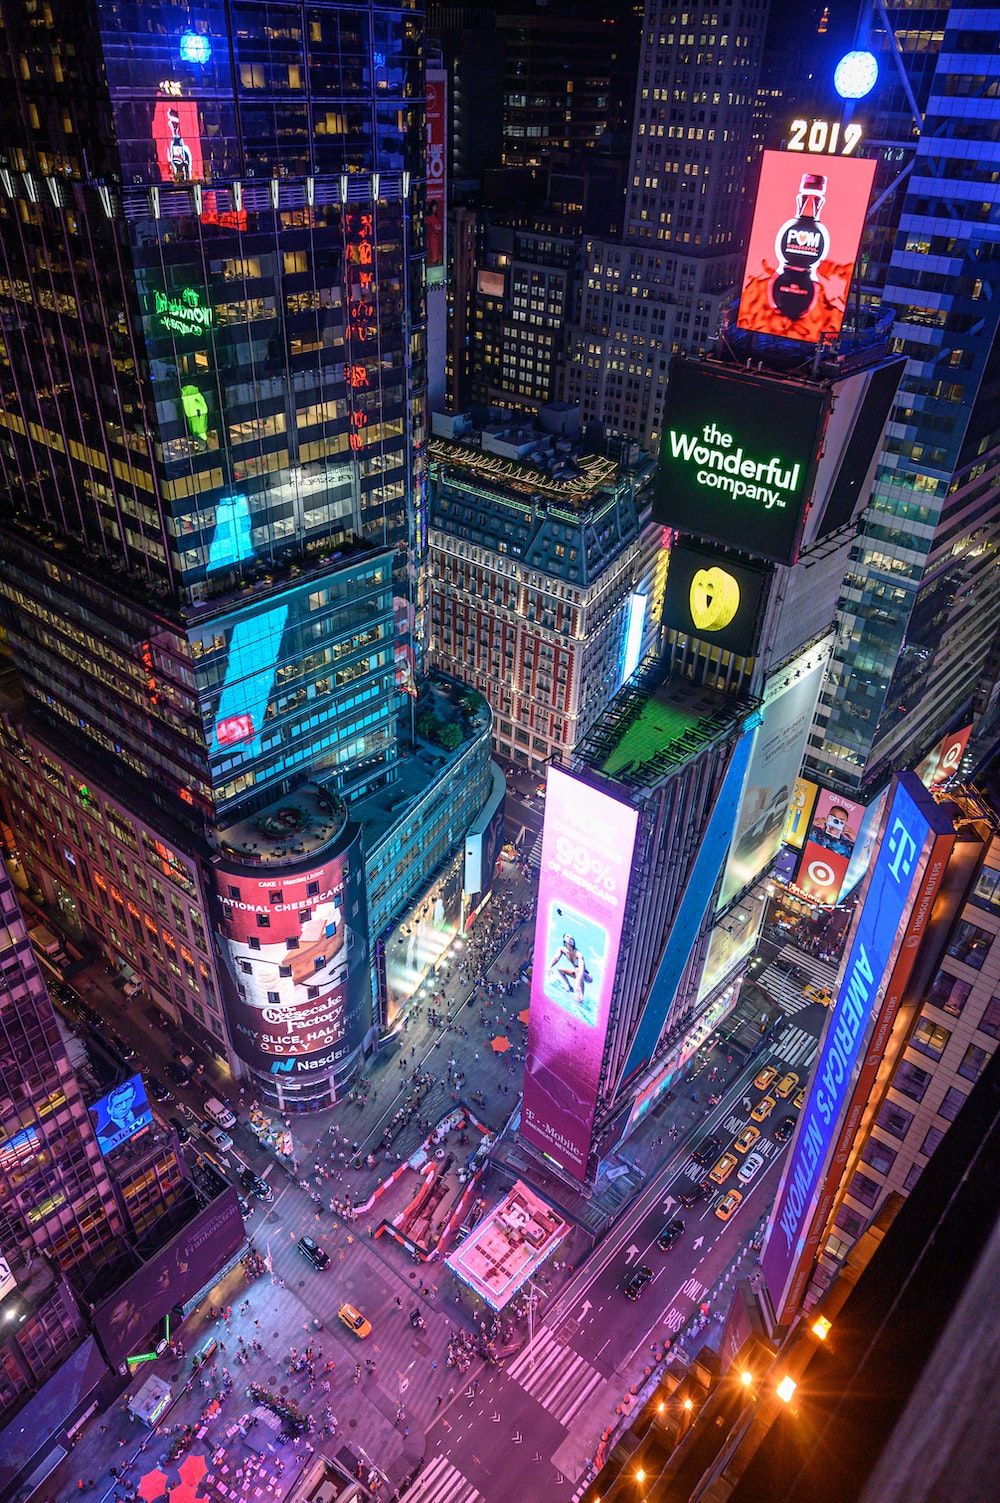 A city at night with many tall buildings - New York